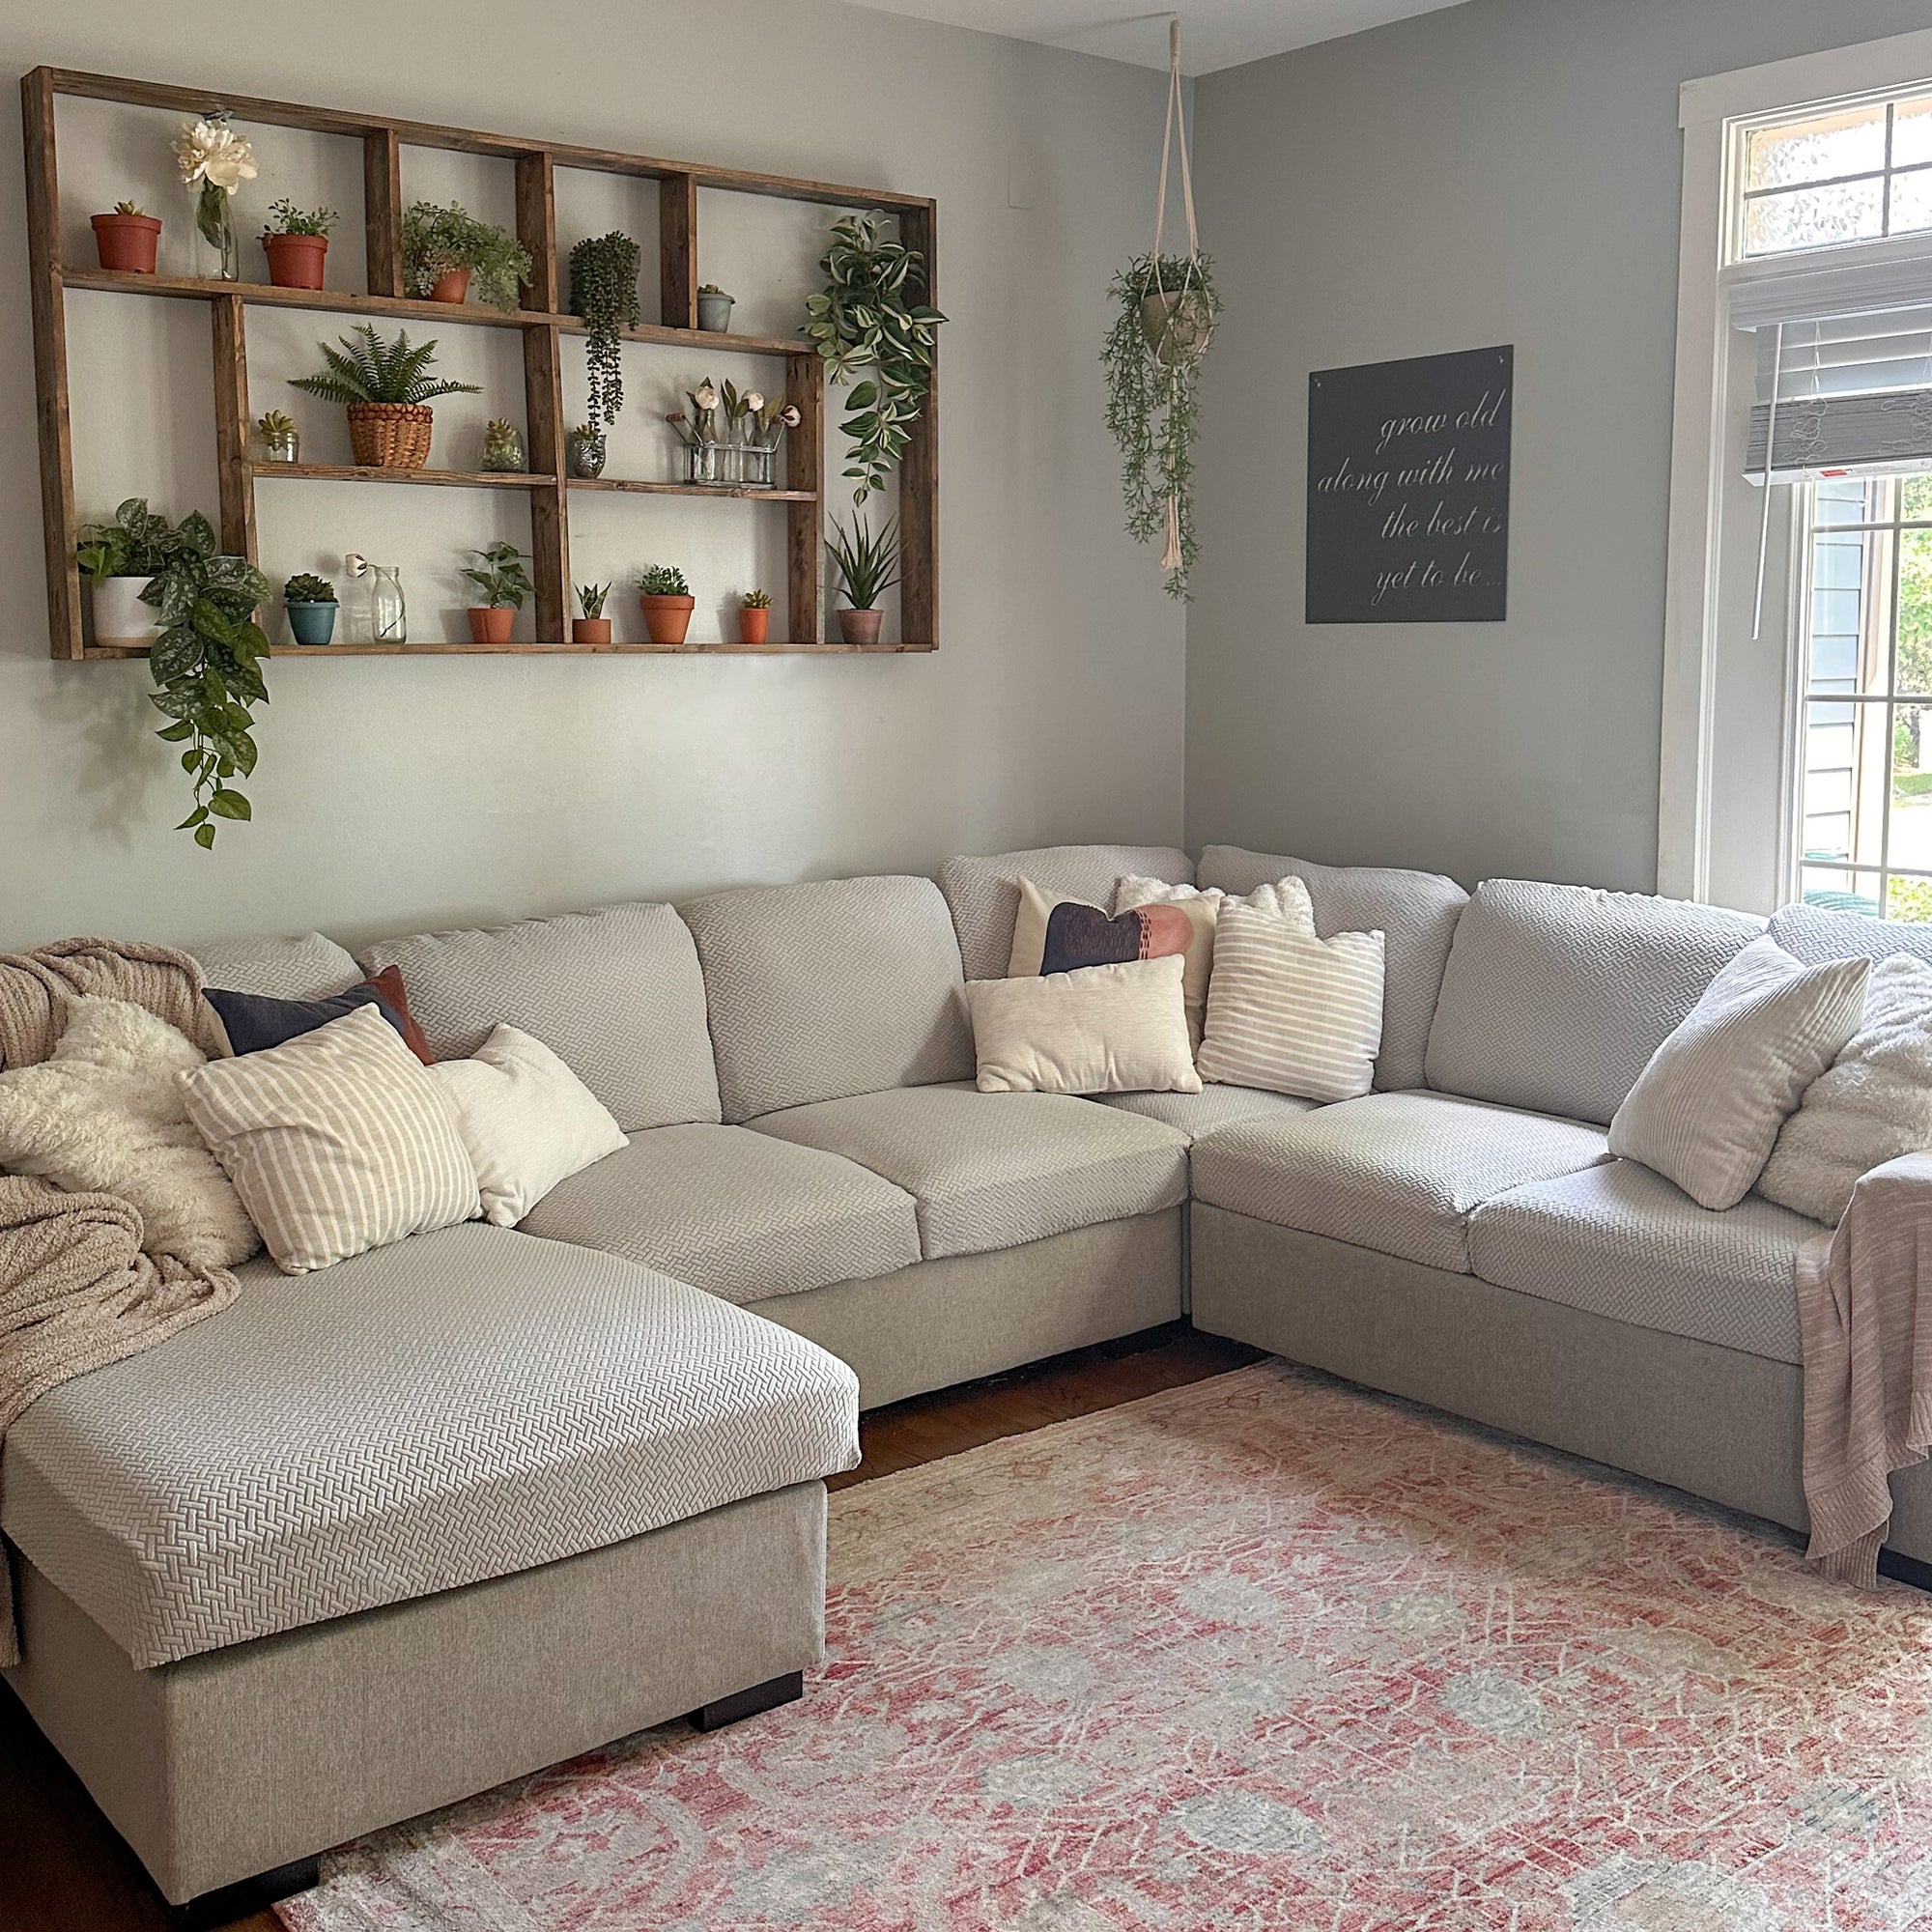 How You Can Reduce Waste in Your Home with Sofa Covers - Nolan Interior